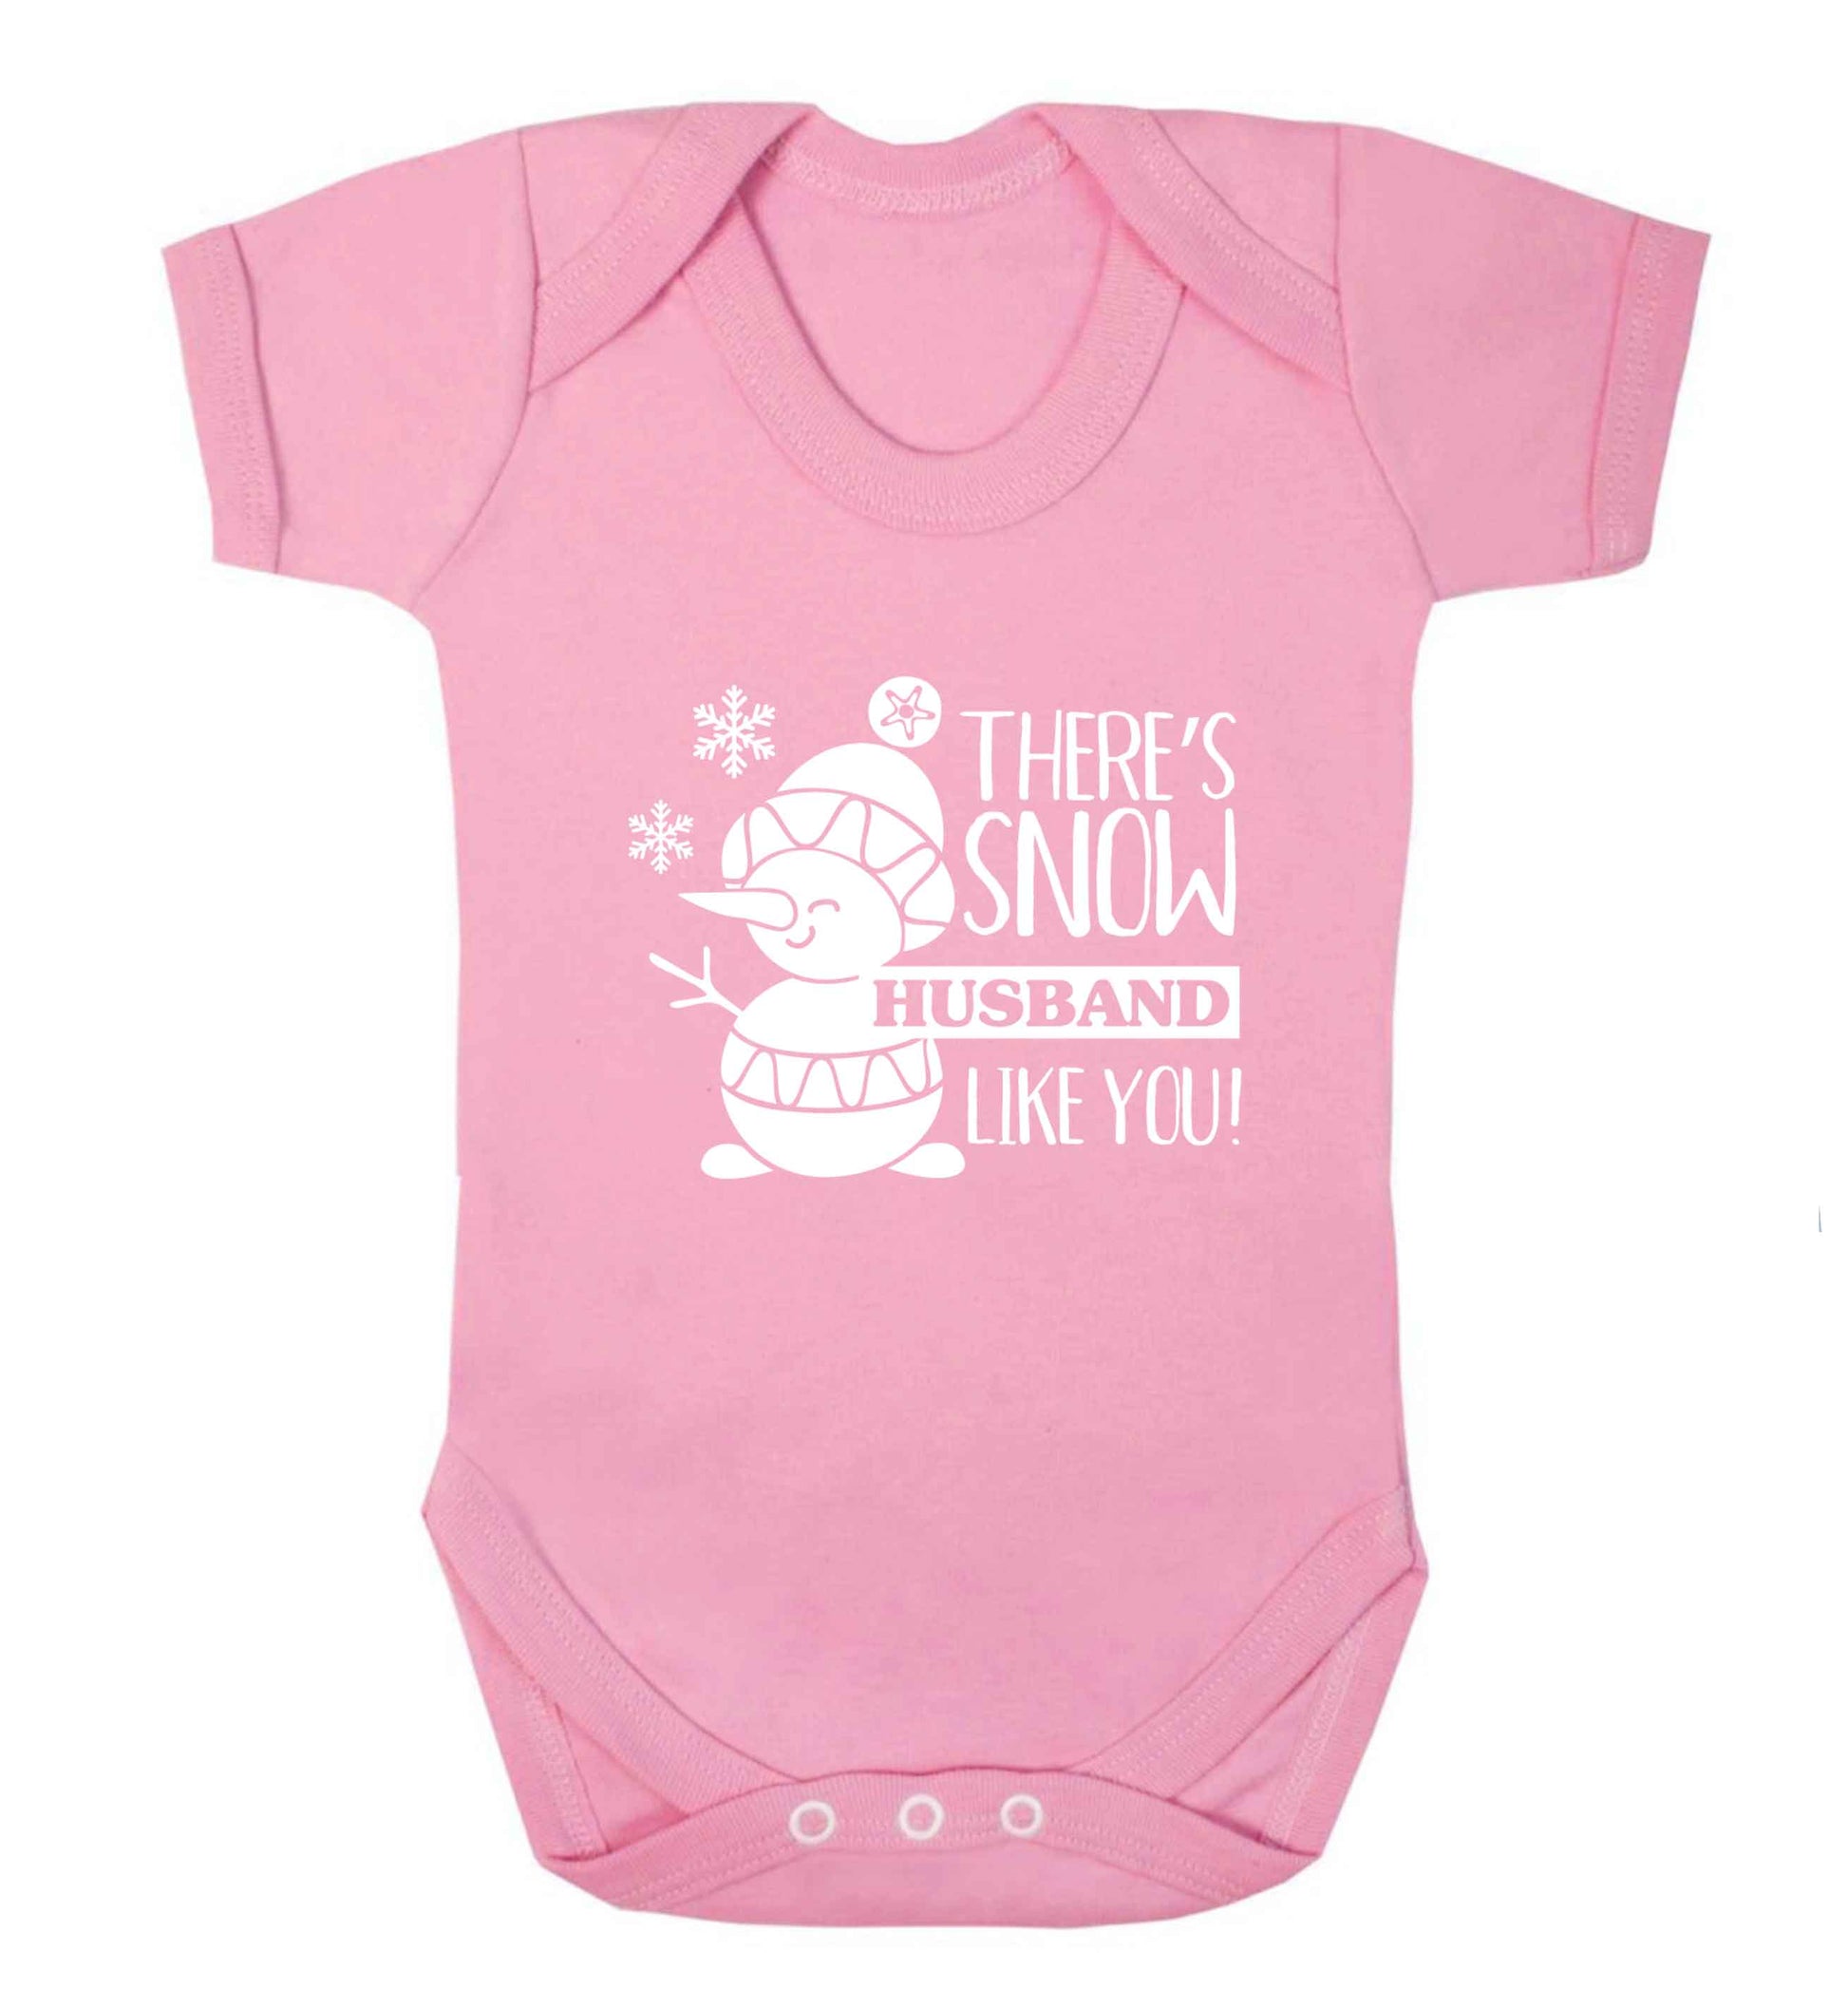 There's snow husband like you baby vest pale pink 18-24 months